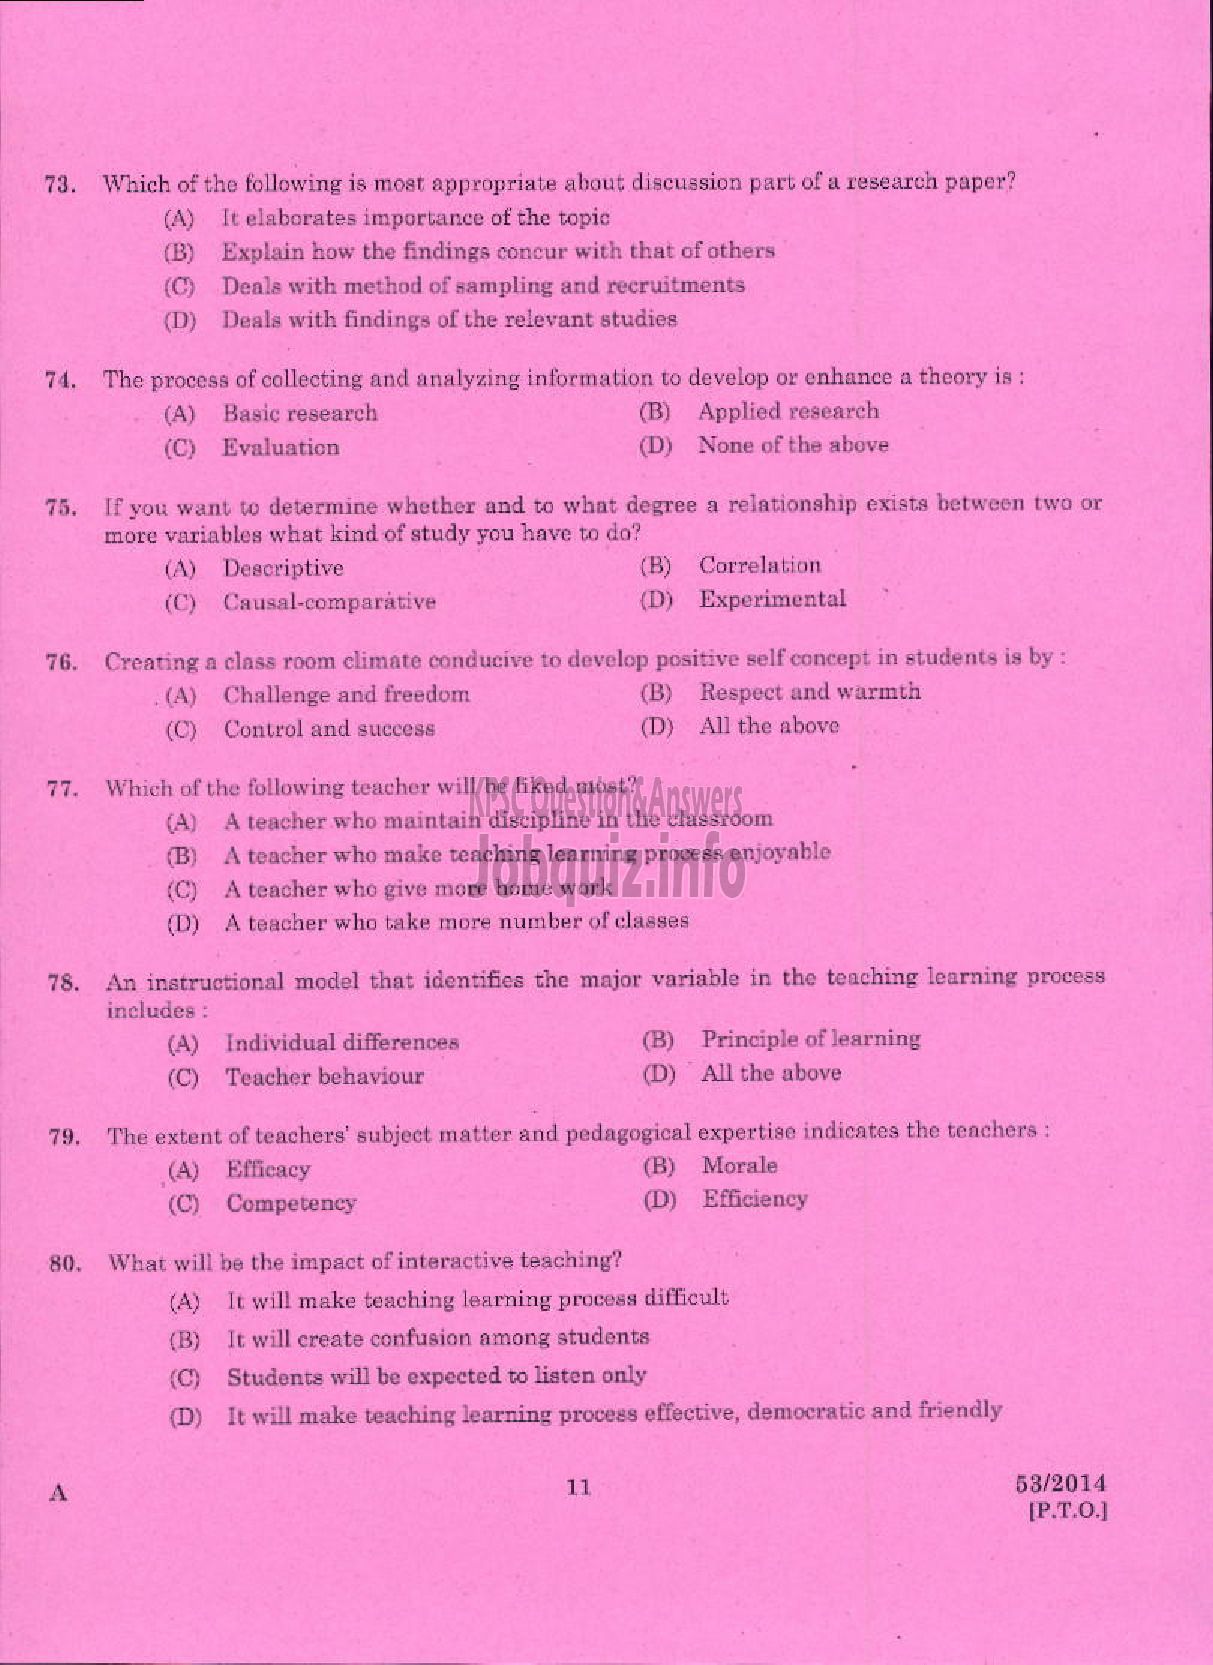 Kerala PSC Question Paper - LECTURER IN TRAVEL AND TOURISM KERALA COLLEGIATE EDUCATION-9